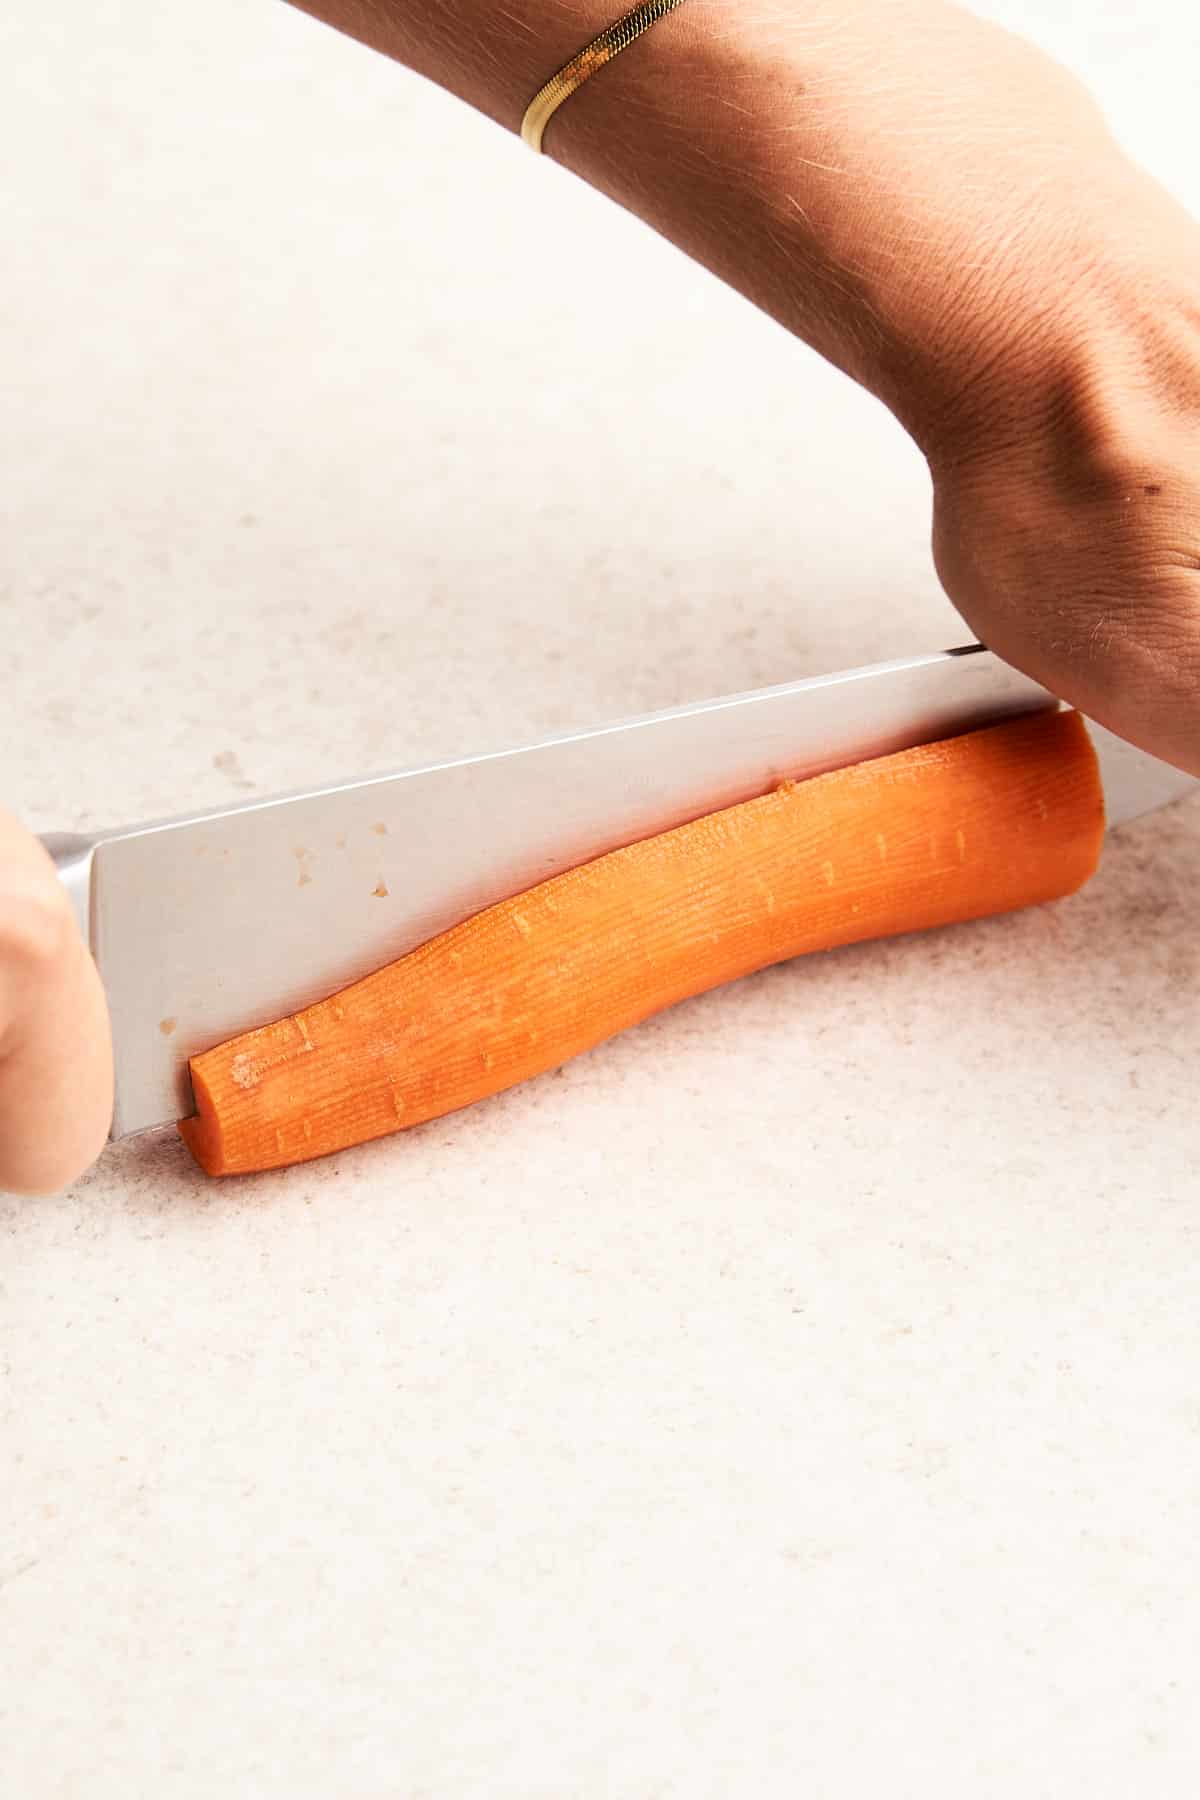 Cutting a carrot in half lengthwise.